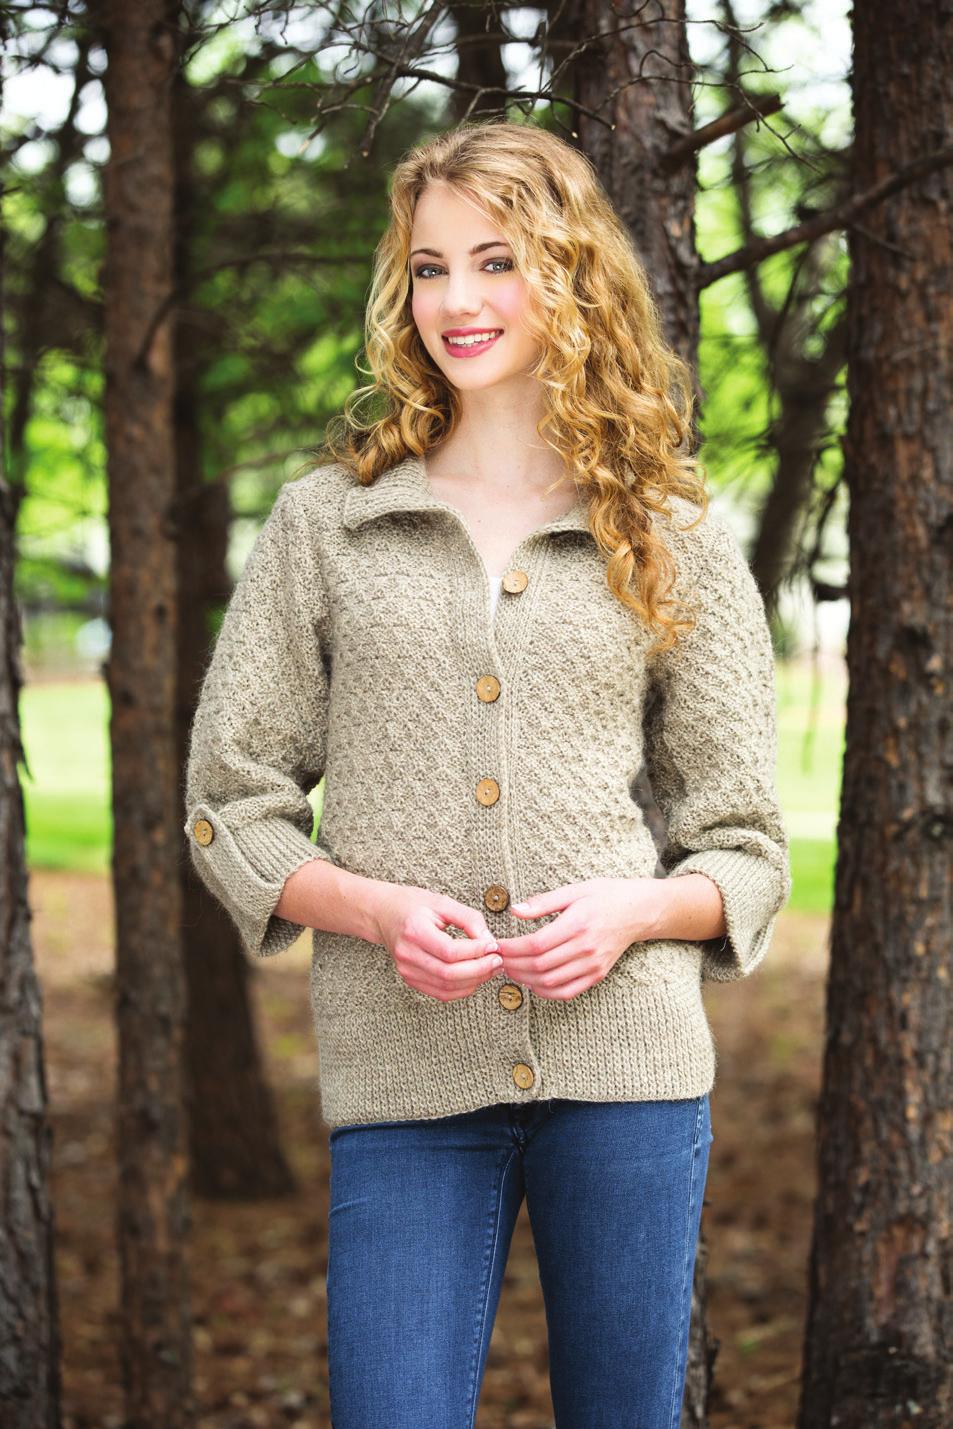 Musket Cardigan By Premier Yarns Design Team Level: Advanced SIZES X-Small (Small, Medium, Large, X-Large) Shown in X-Small Size FINISHED MEASUREMENTS Length: 25 (26, 28, 29½, 30½) Bust: 34 (38, 42,